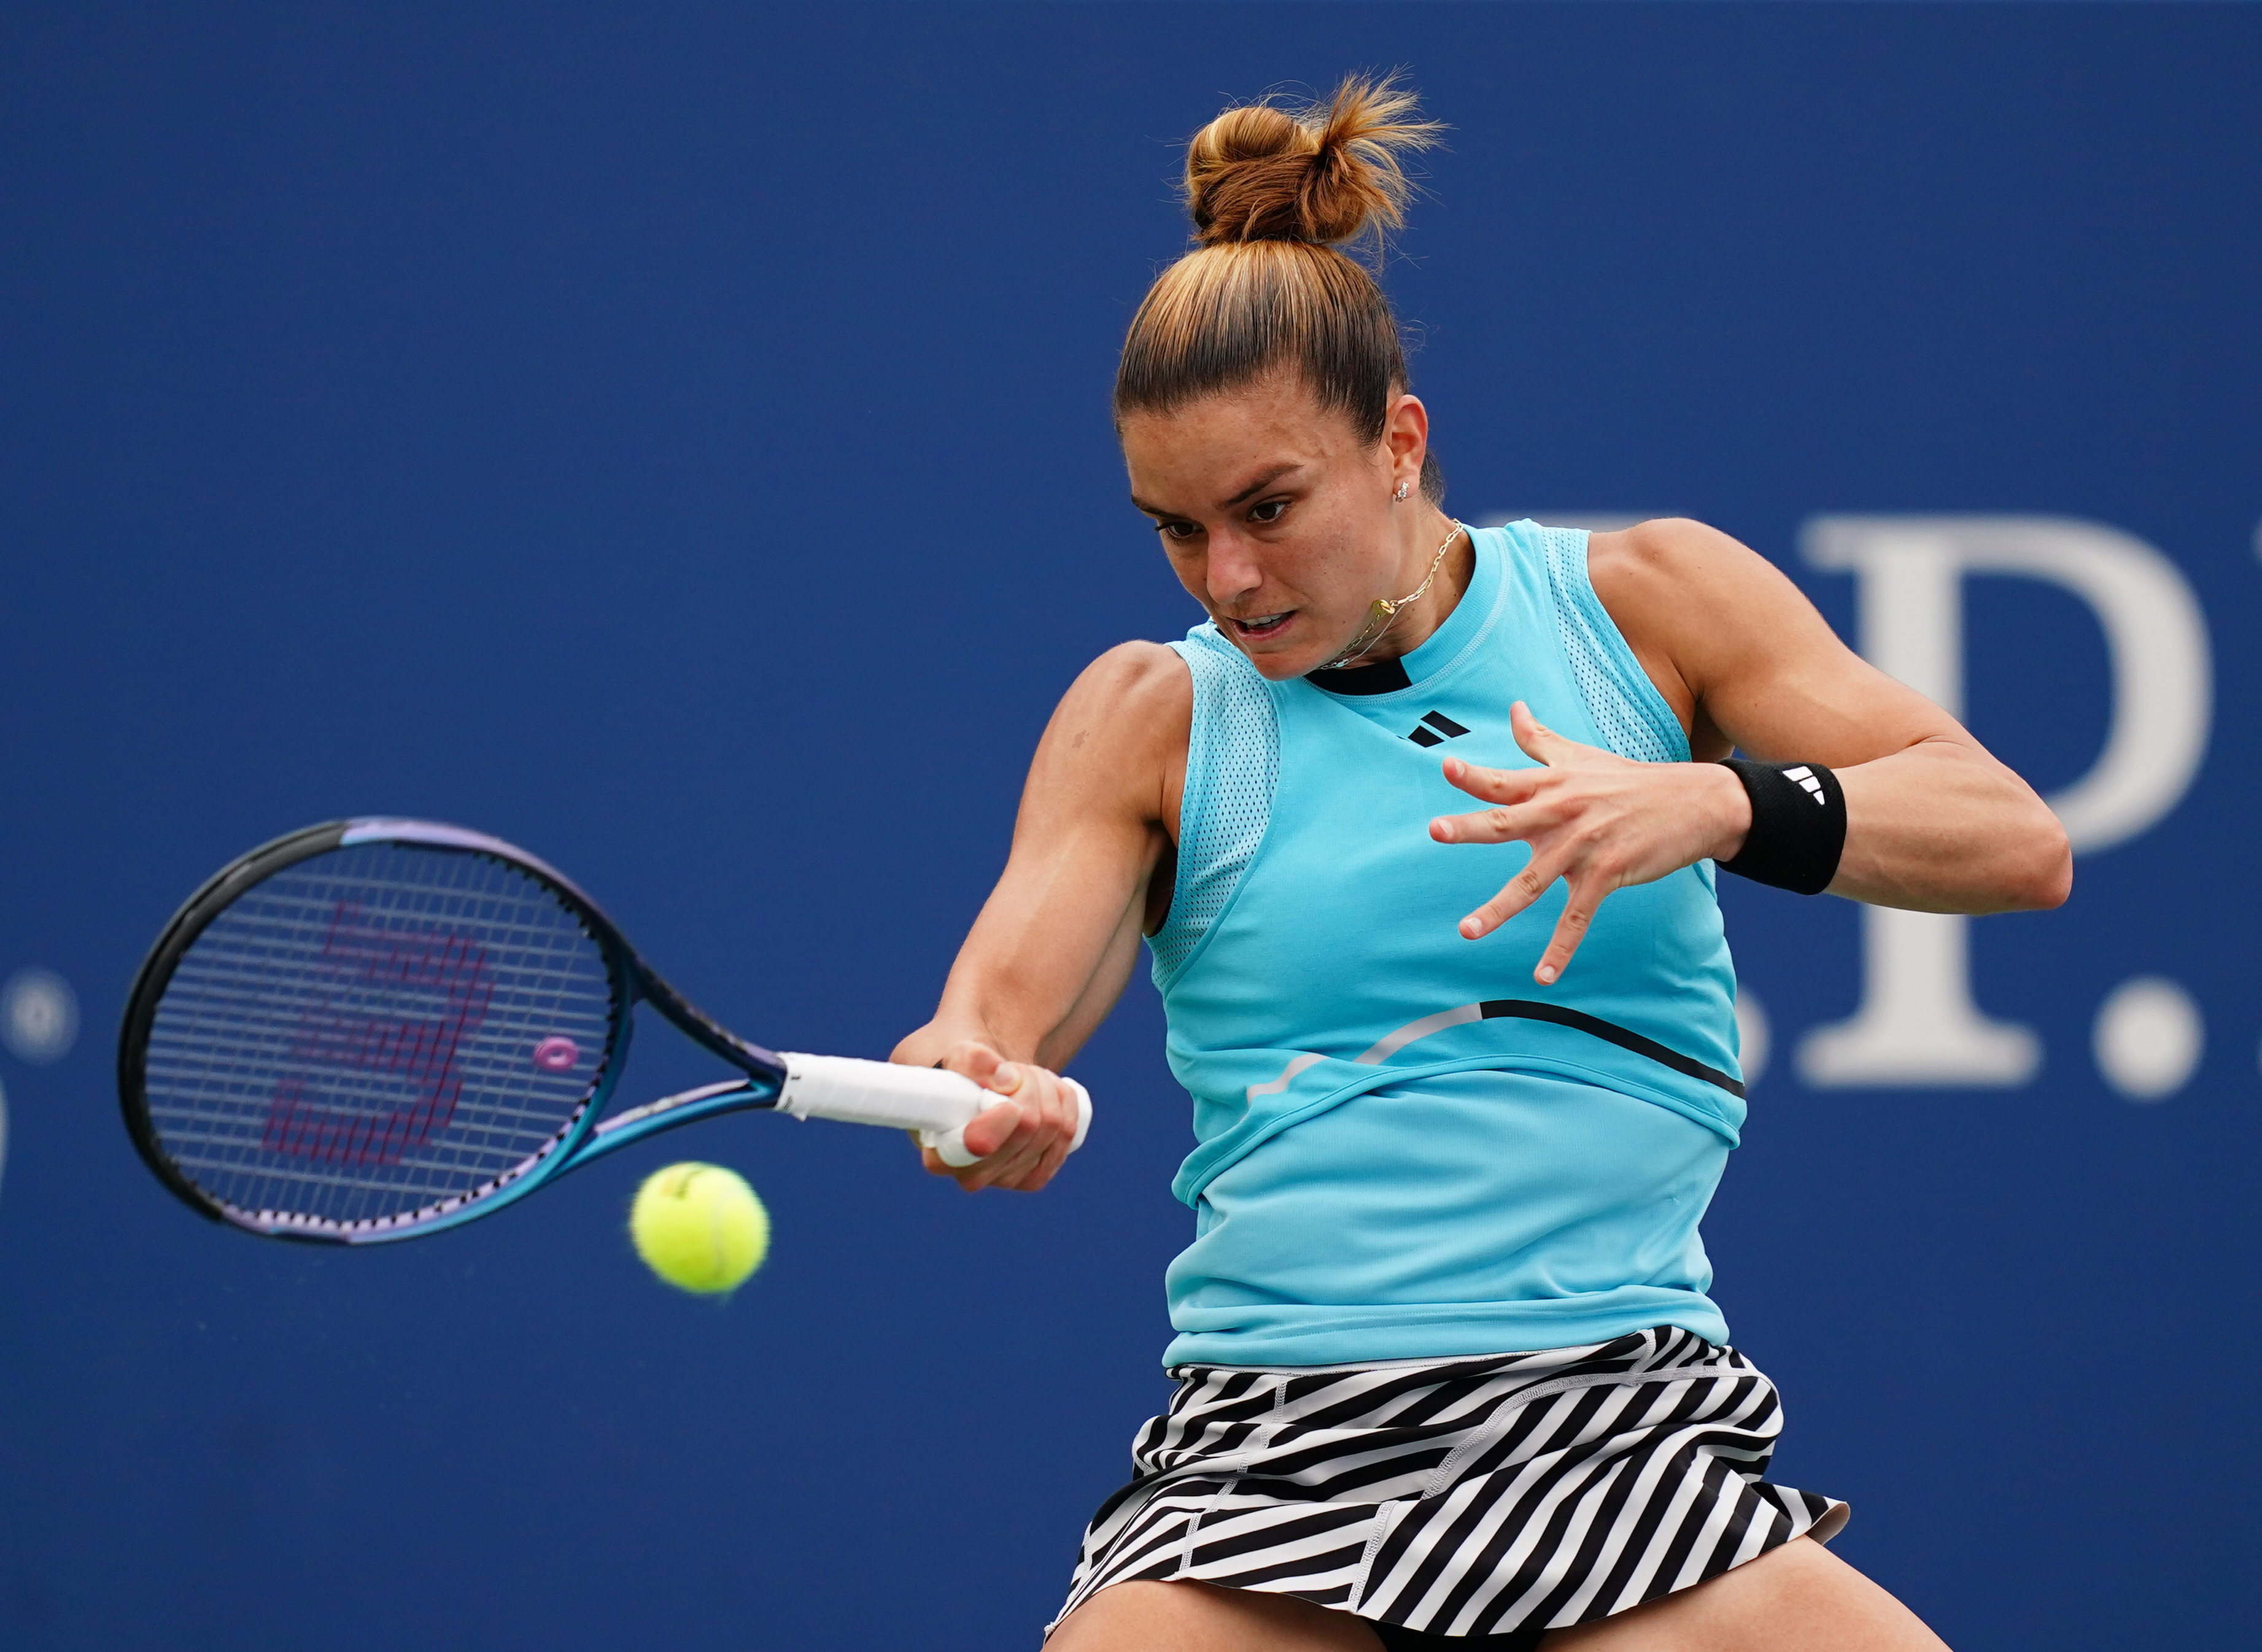 Sakkari may take a break from tennis after early exit at US Open Reuters